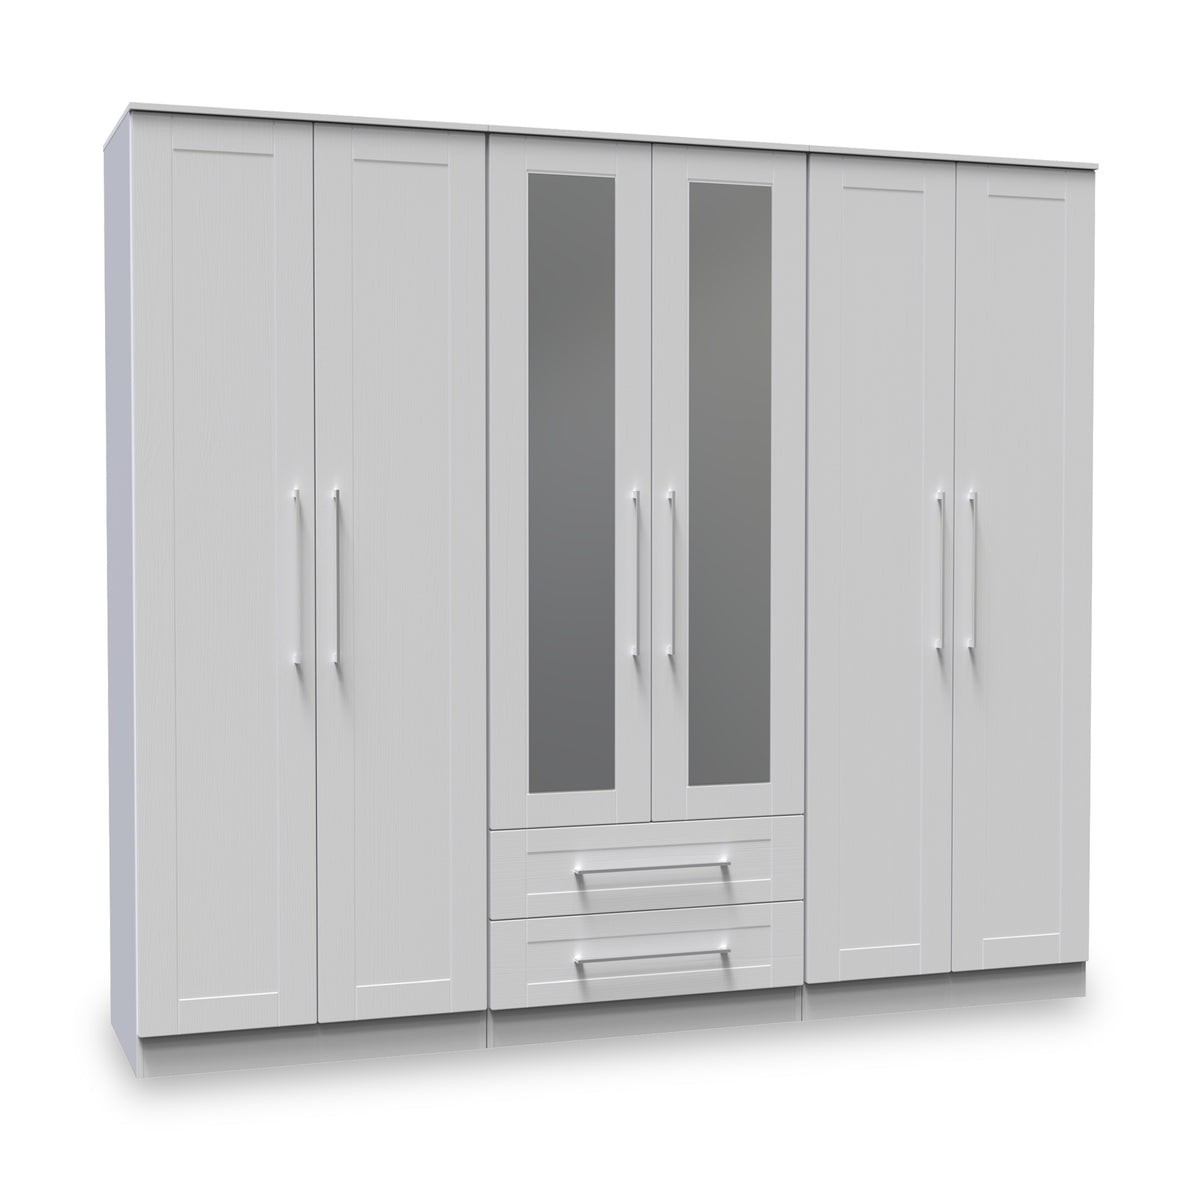 Bellamy Grey Tall 6 Door 2 Drawer with Mirrors Wardrobe by Roseland